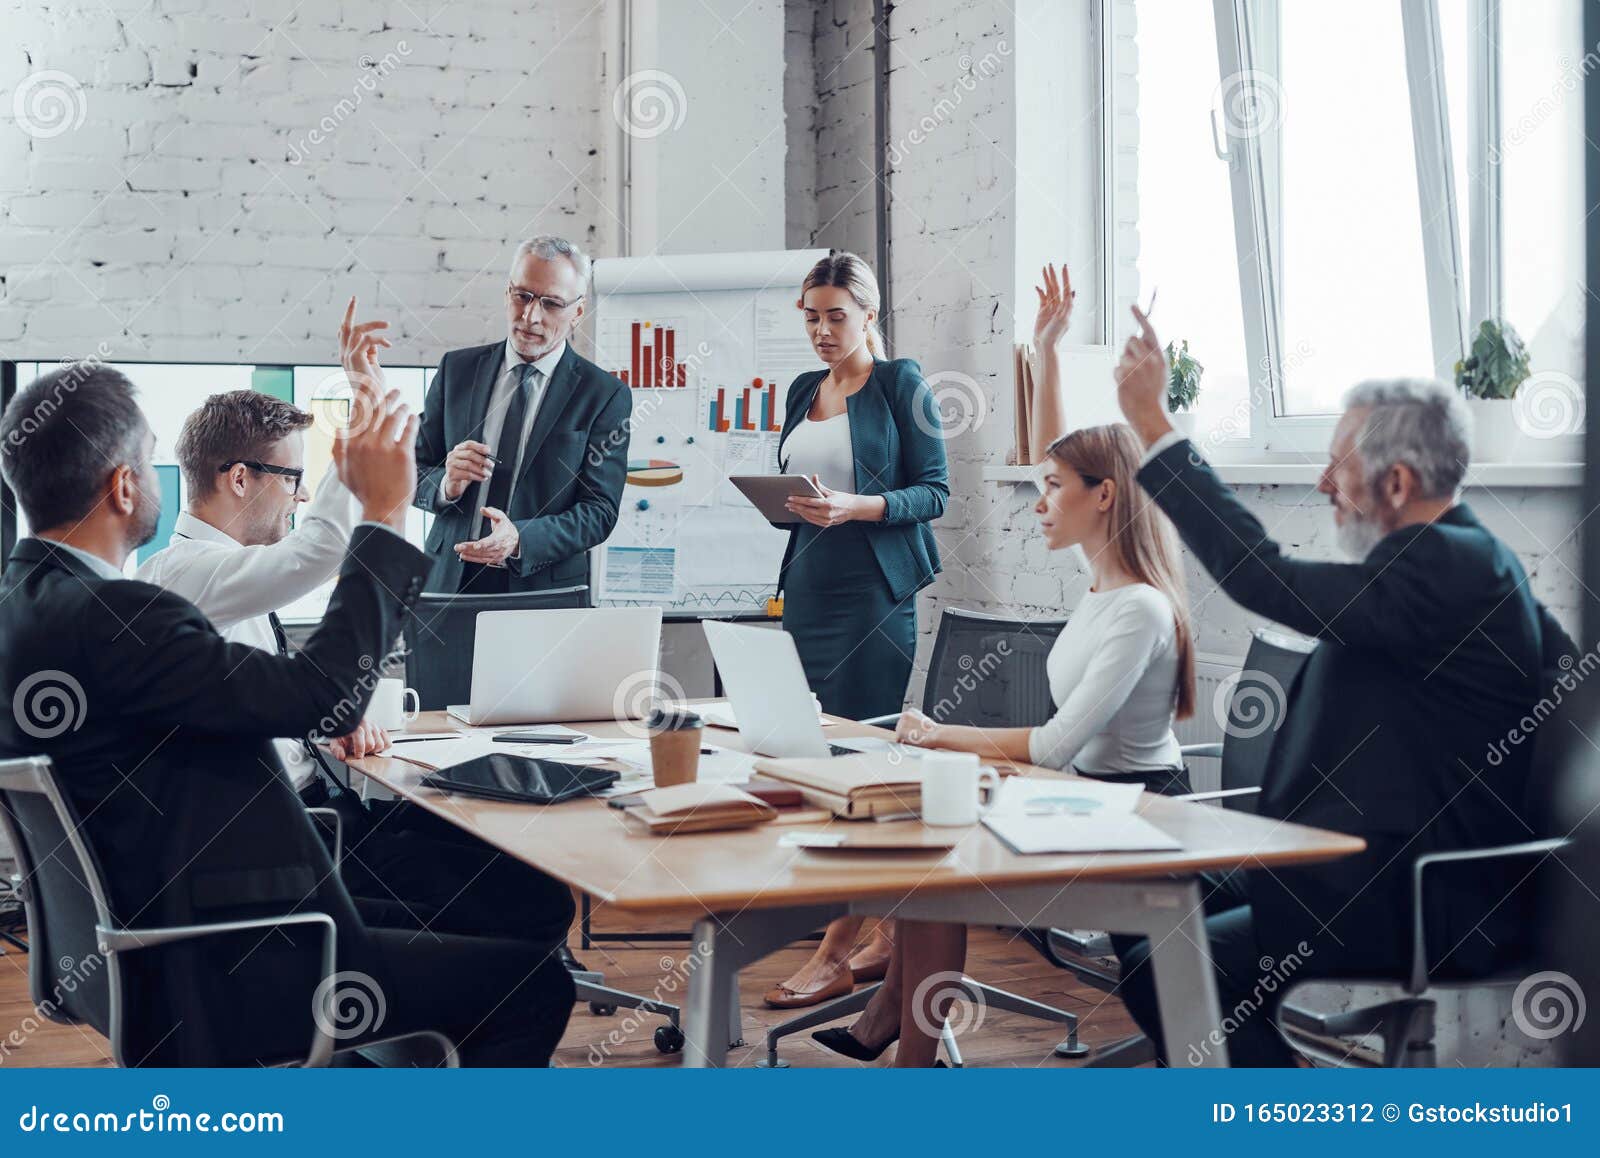 124 Voting Show Hands Photos Free Royalty Free Stock Photos From Dreamstime